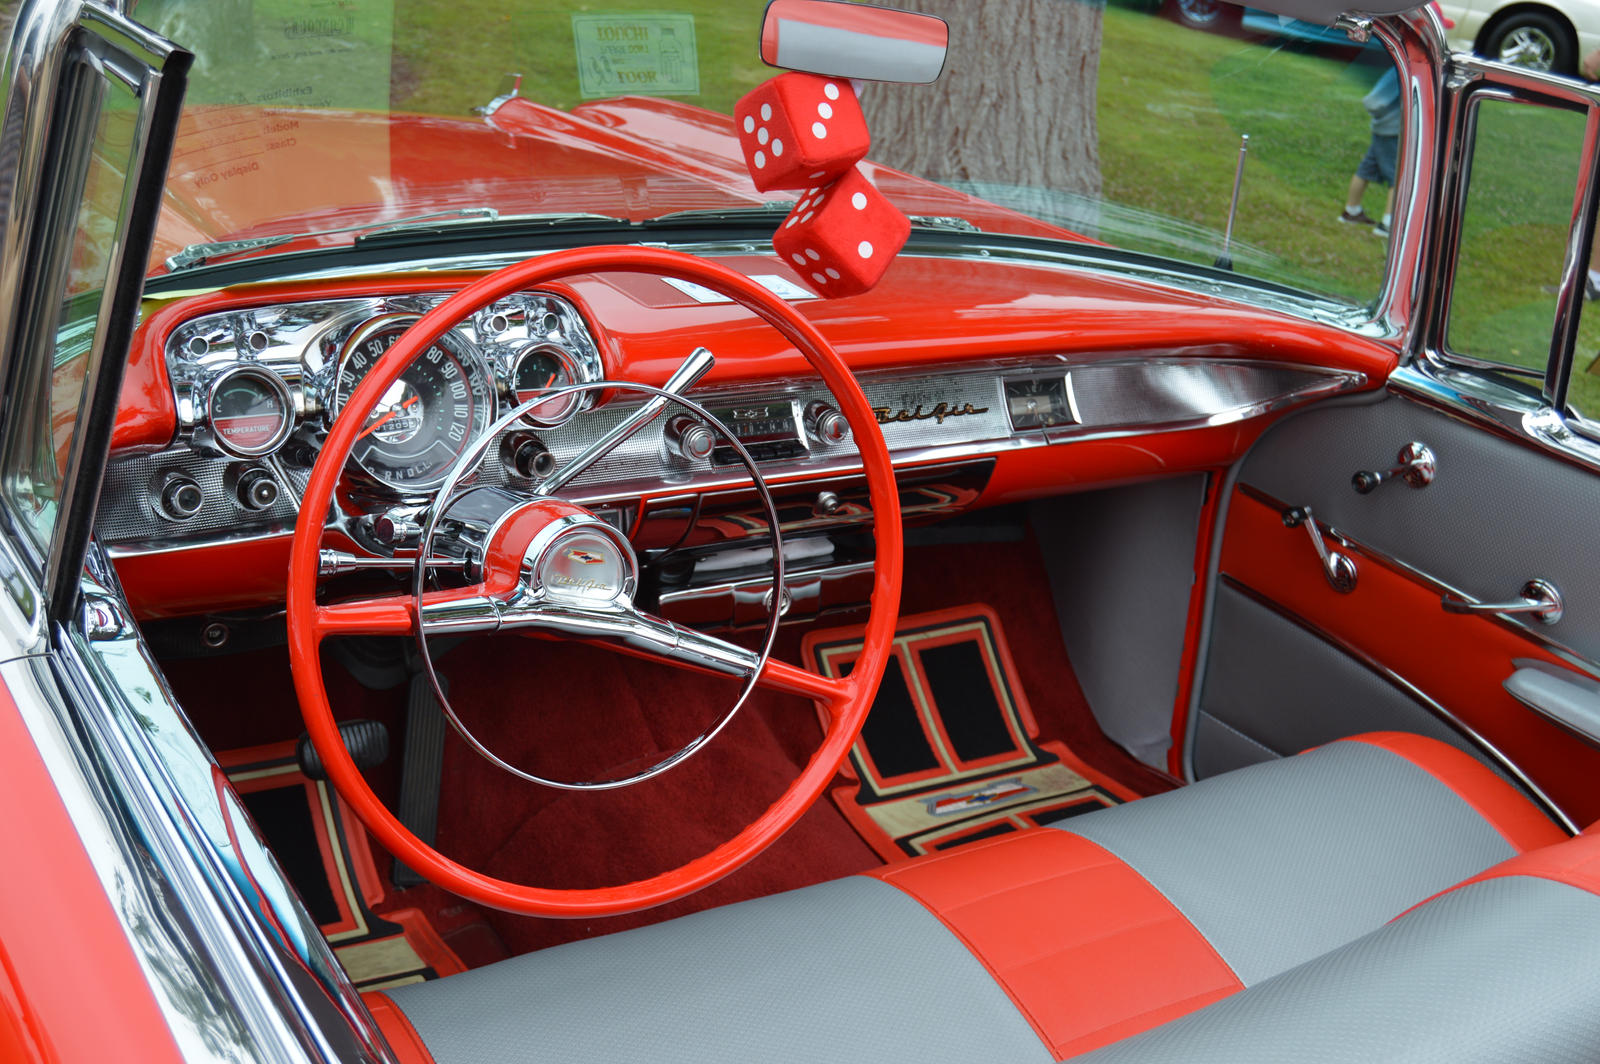 1957 Chevrolet Bel Air Convertible Interior By Brooklyn47 On